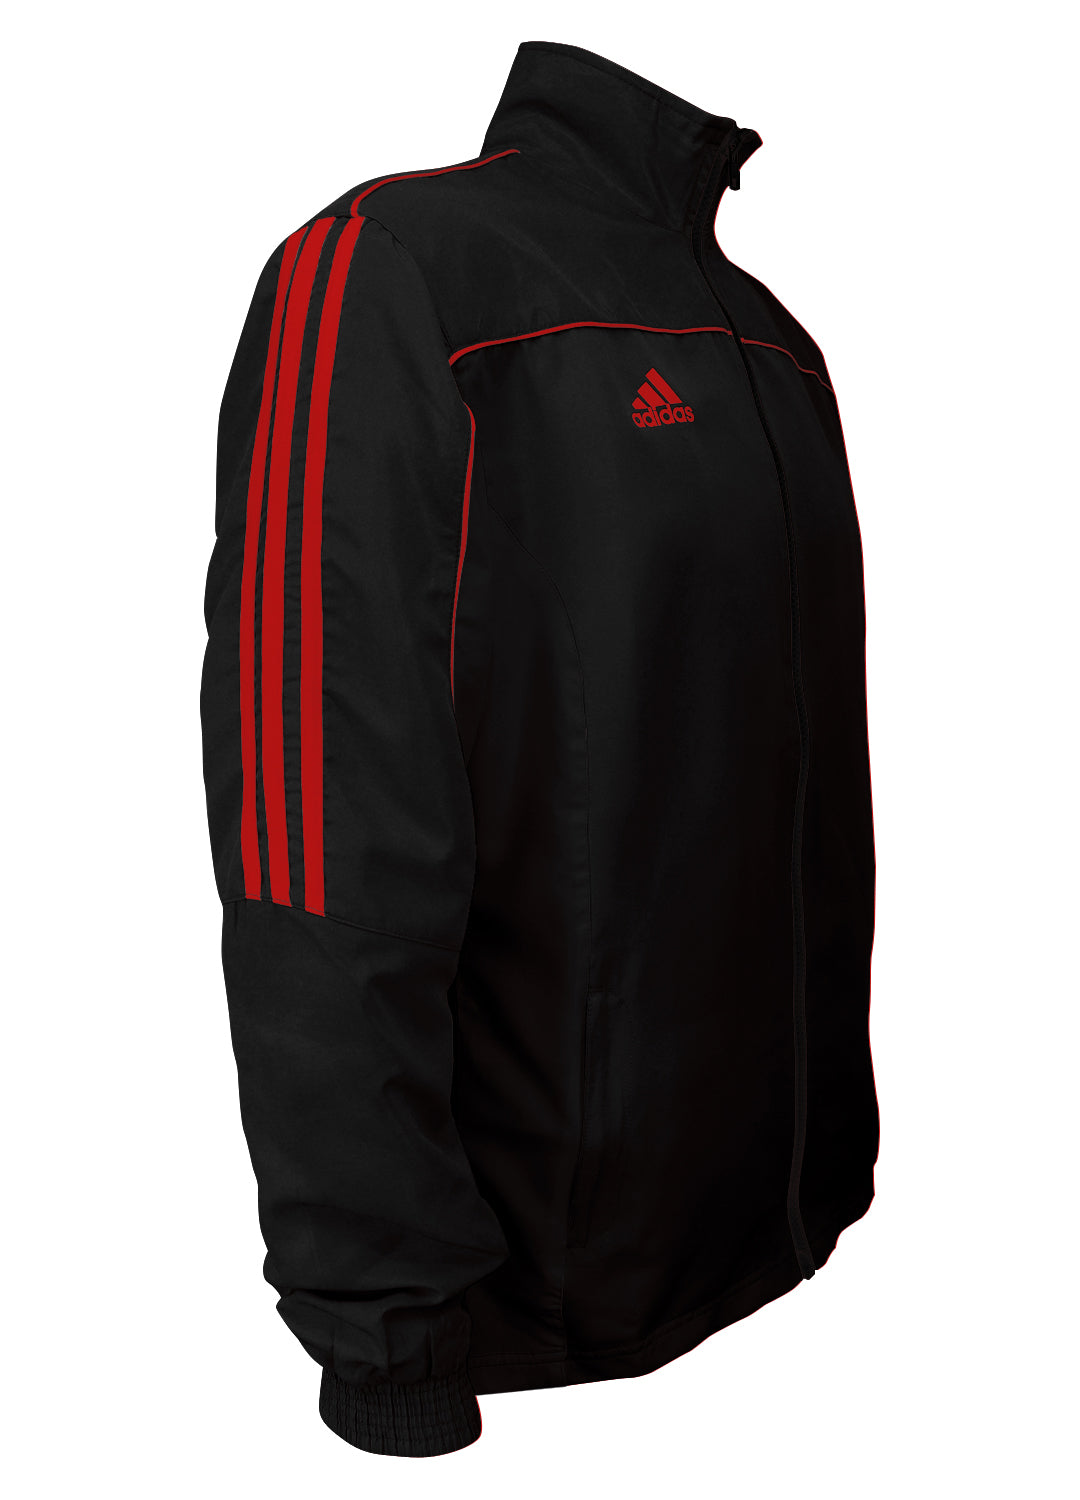 red adidas jacket with black stripes